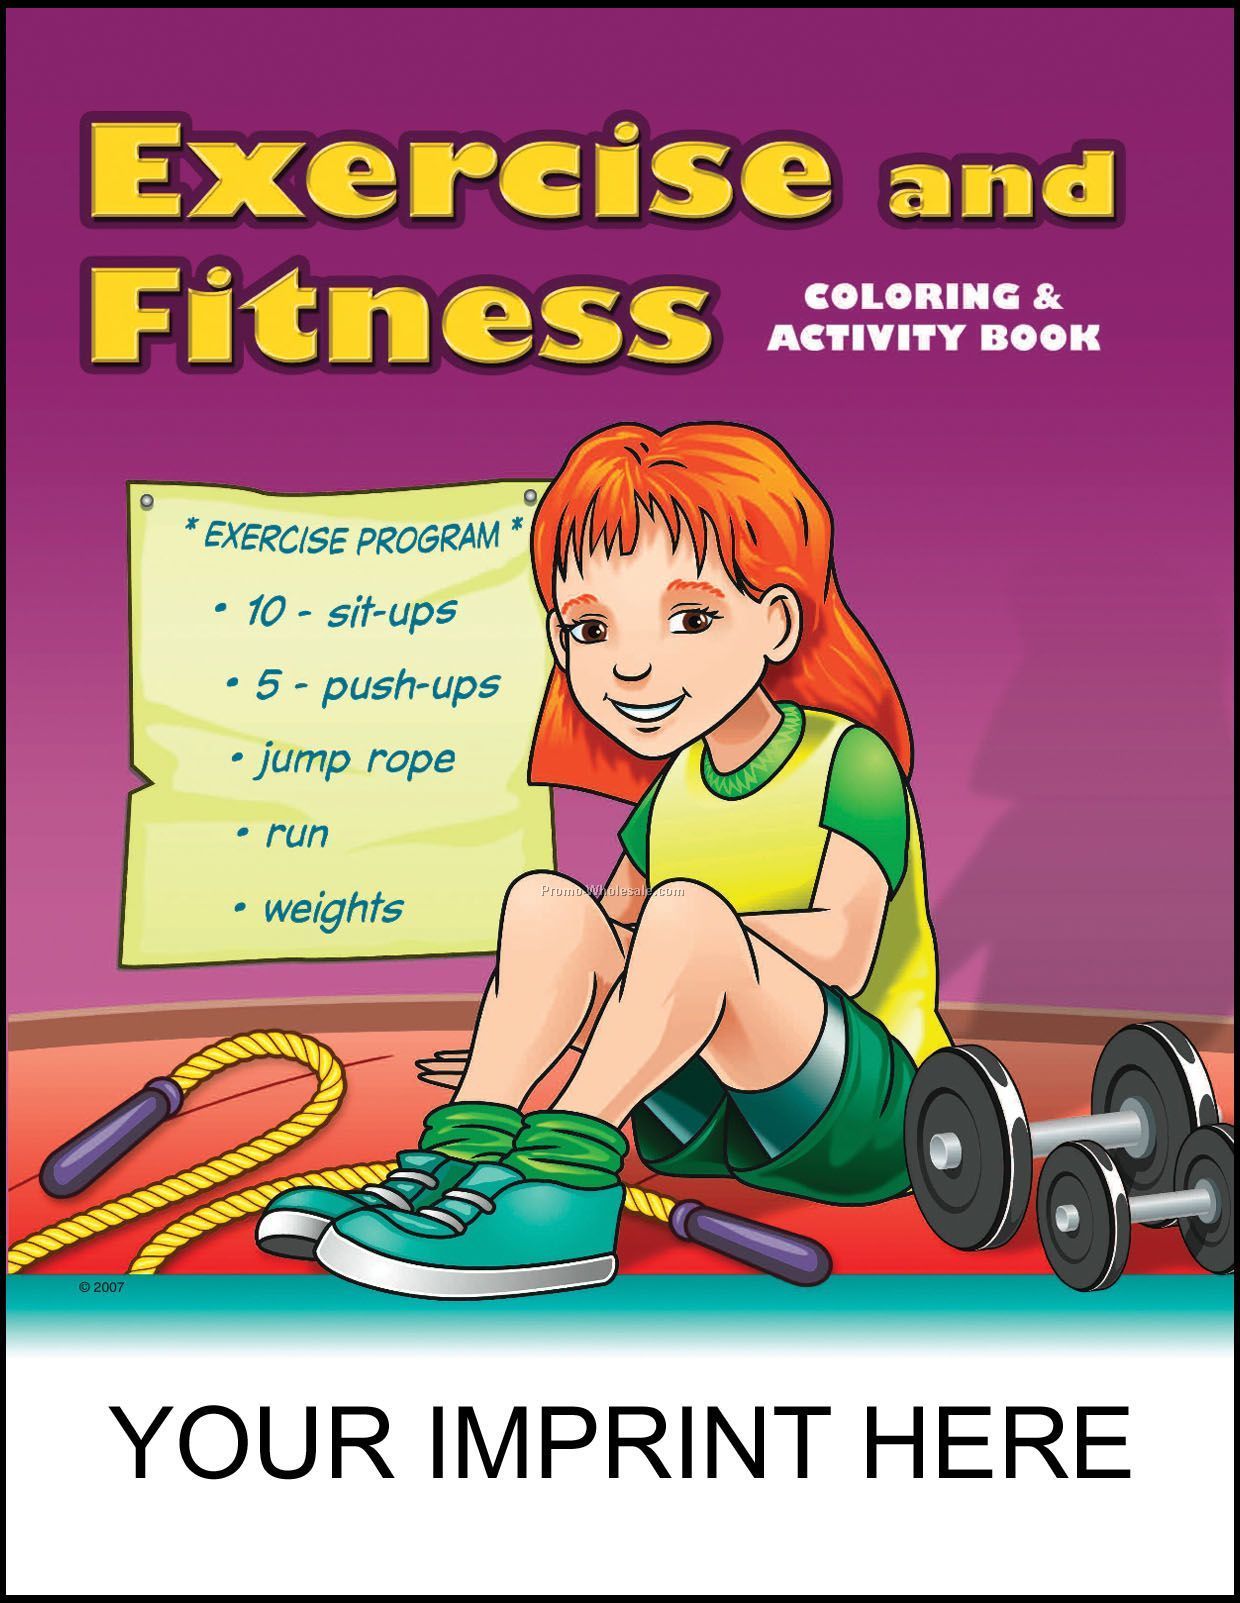 8-3/8"x10-7/8" Exercise And Fitness Coloring & Activity Book